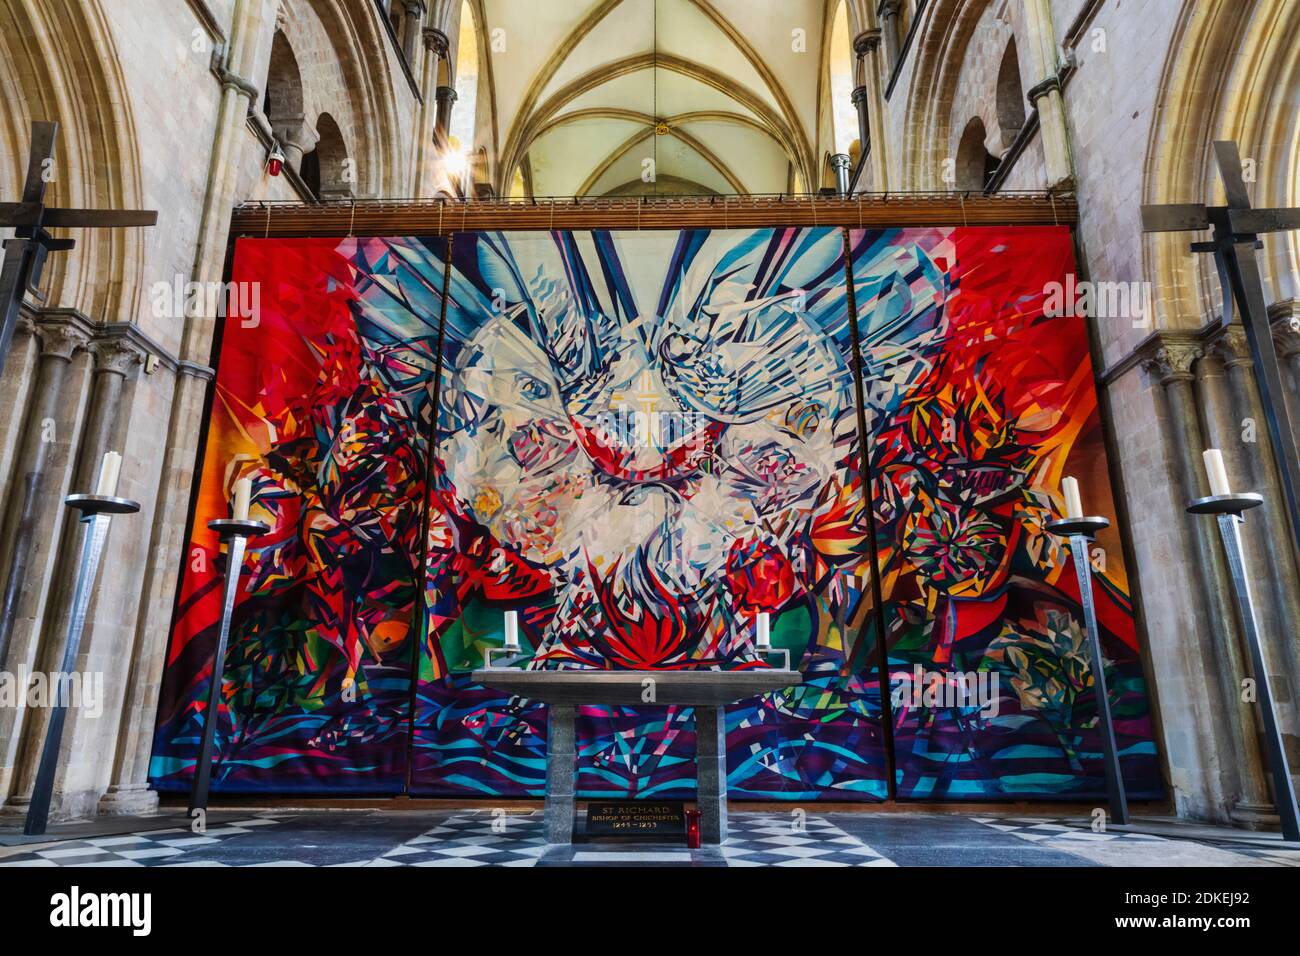 England, West Sussex, Chichester, Chichester Cathedral, The Shrine of St Richard, Tapestry by German Artist Ursula Benker-Schirmer depicting Images Related to The Life of St Richard Stock Photo